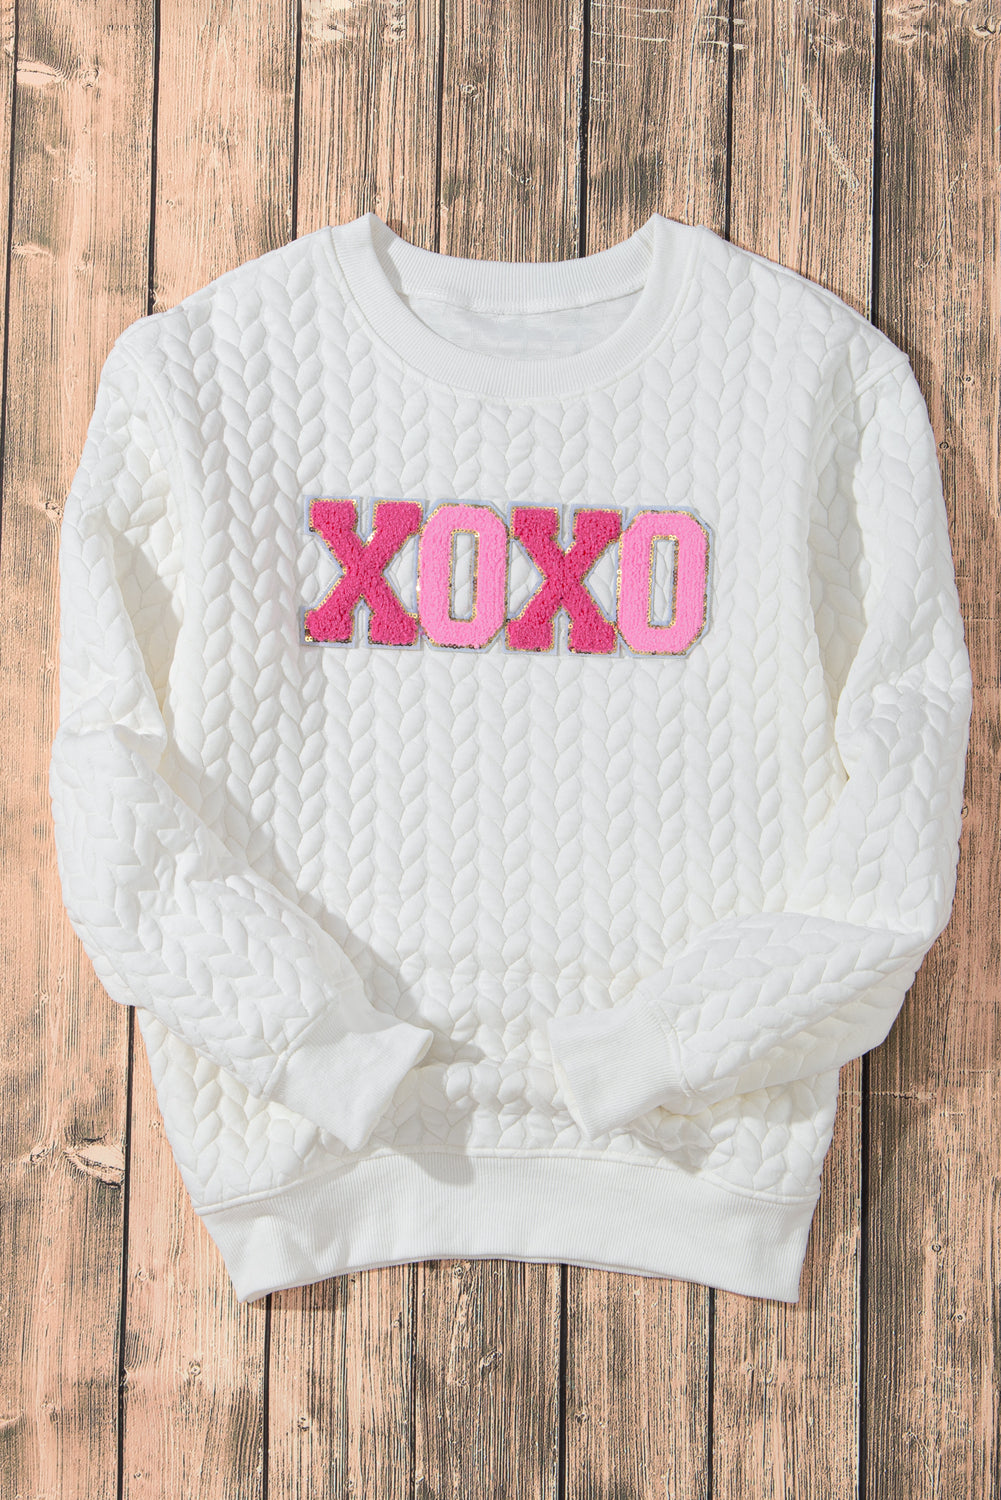 White LUCKY Chenille Embroidered Cable Knit Pullover Sweatshirt